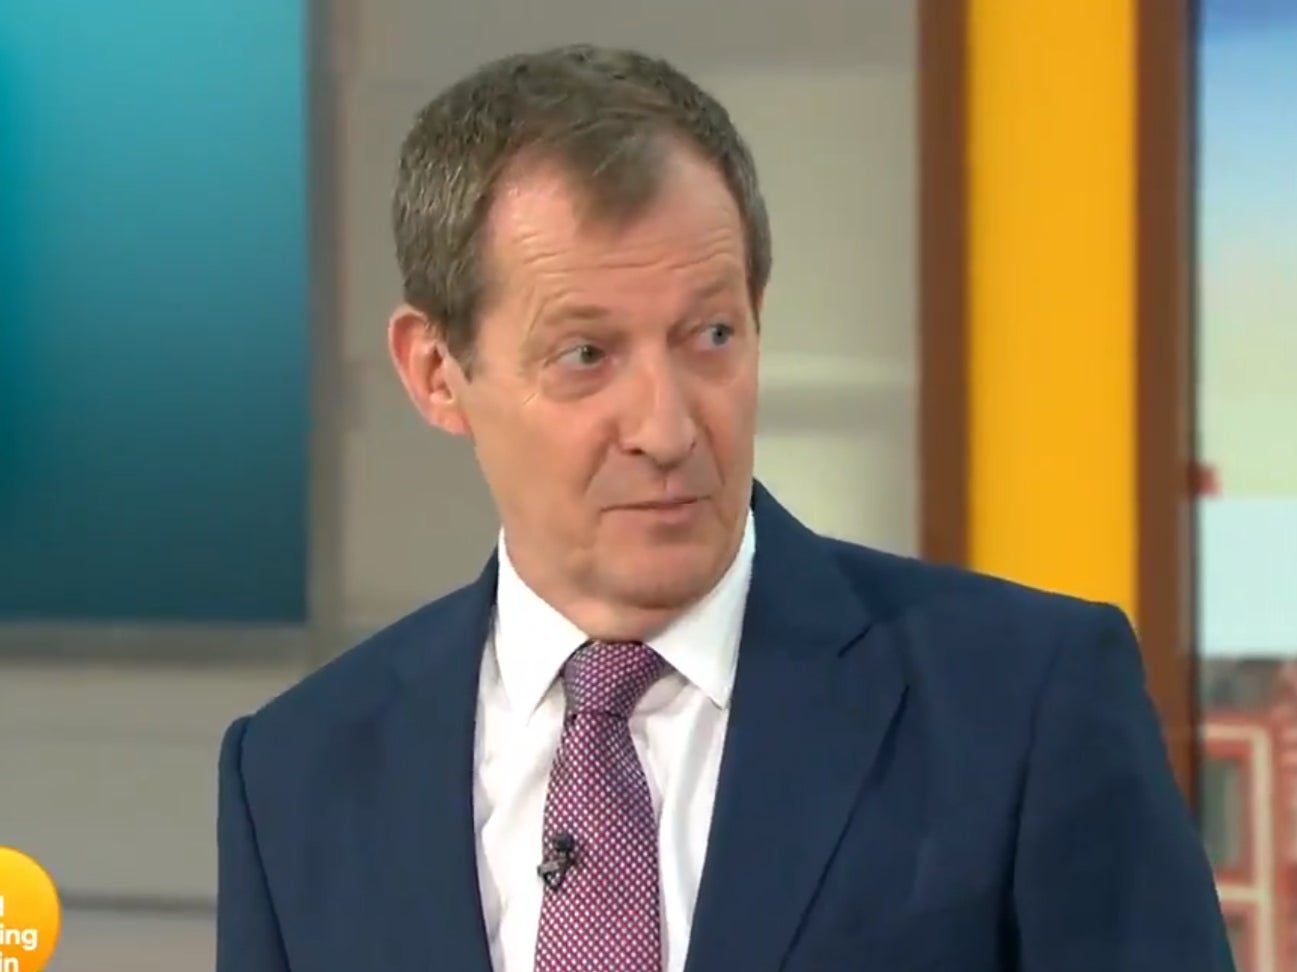 Campbell, the ‘Good Morning Britain’ presenter who could have been Labour leader